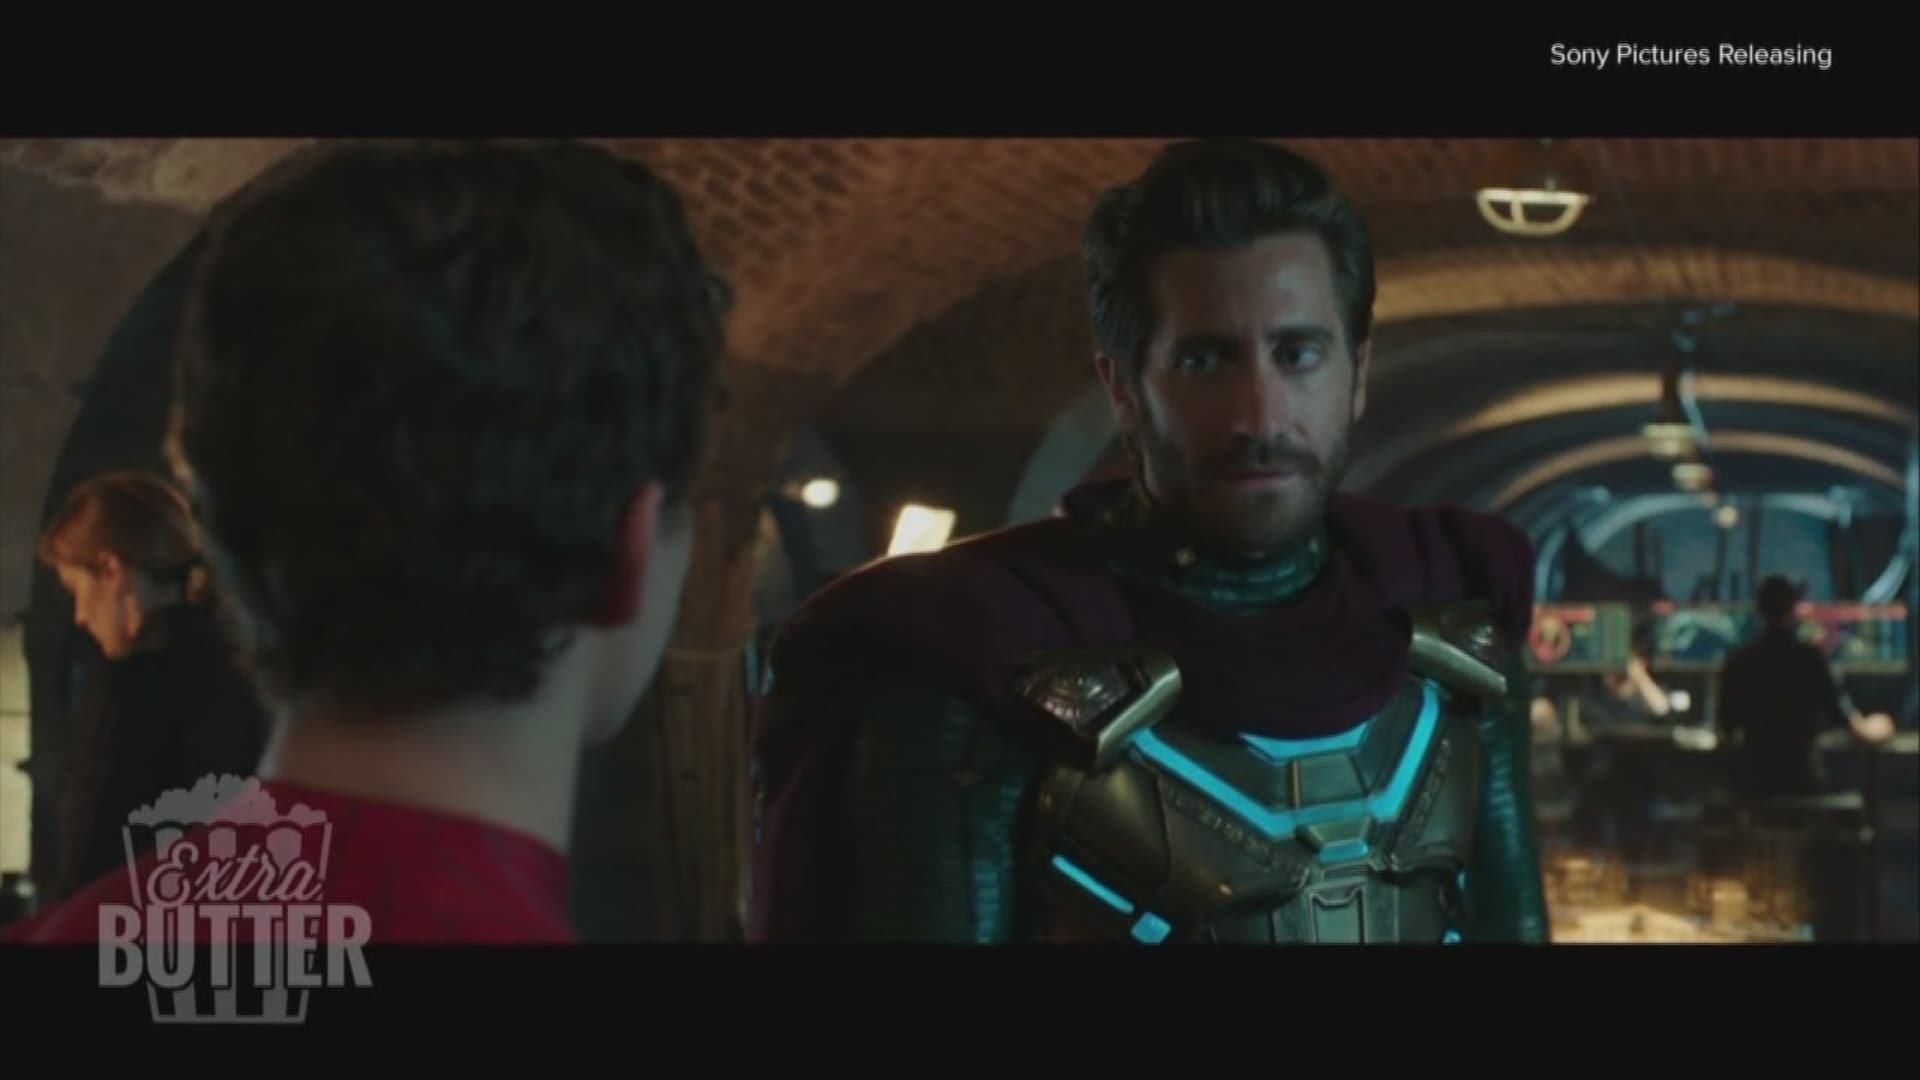 Jake Gyllenhaal talks about the expectations that come with joining the Marvel Cinematic Universe. He also tries to explain the plot of 'Spider-Man: Far From Home' but doesn't get far.